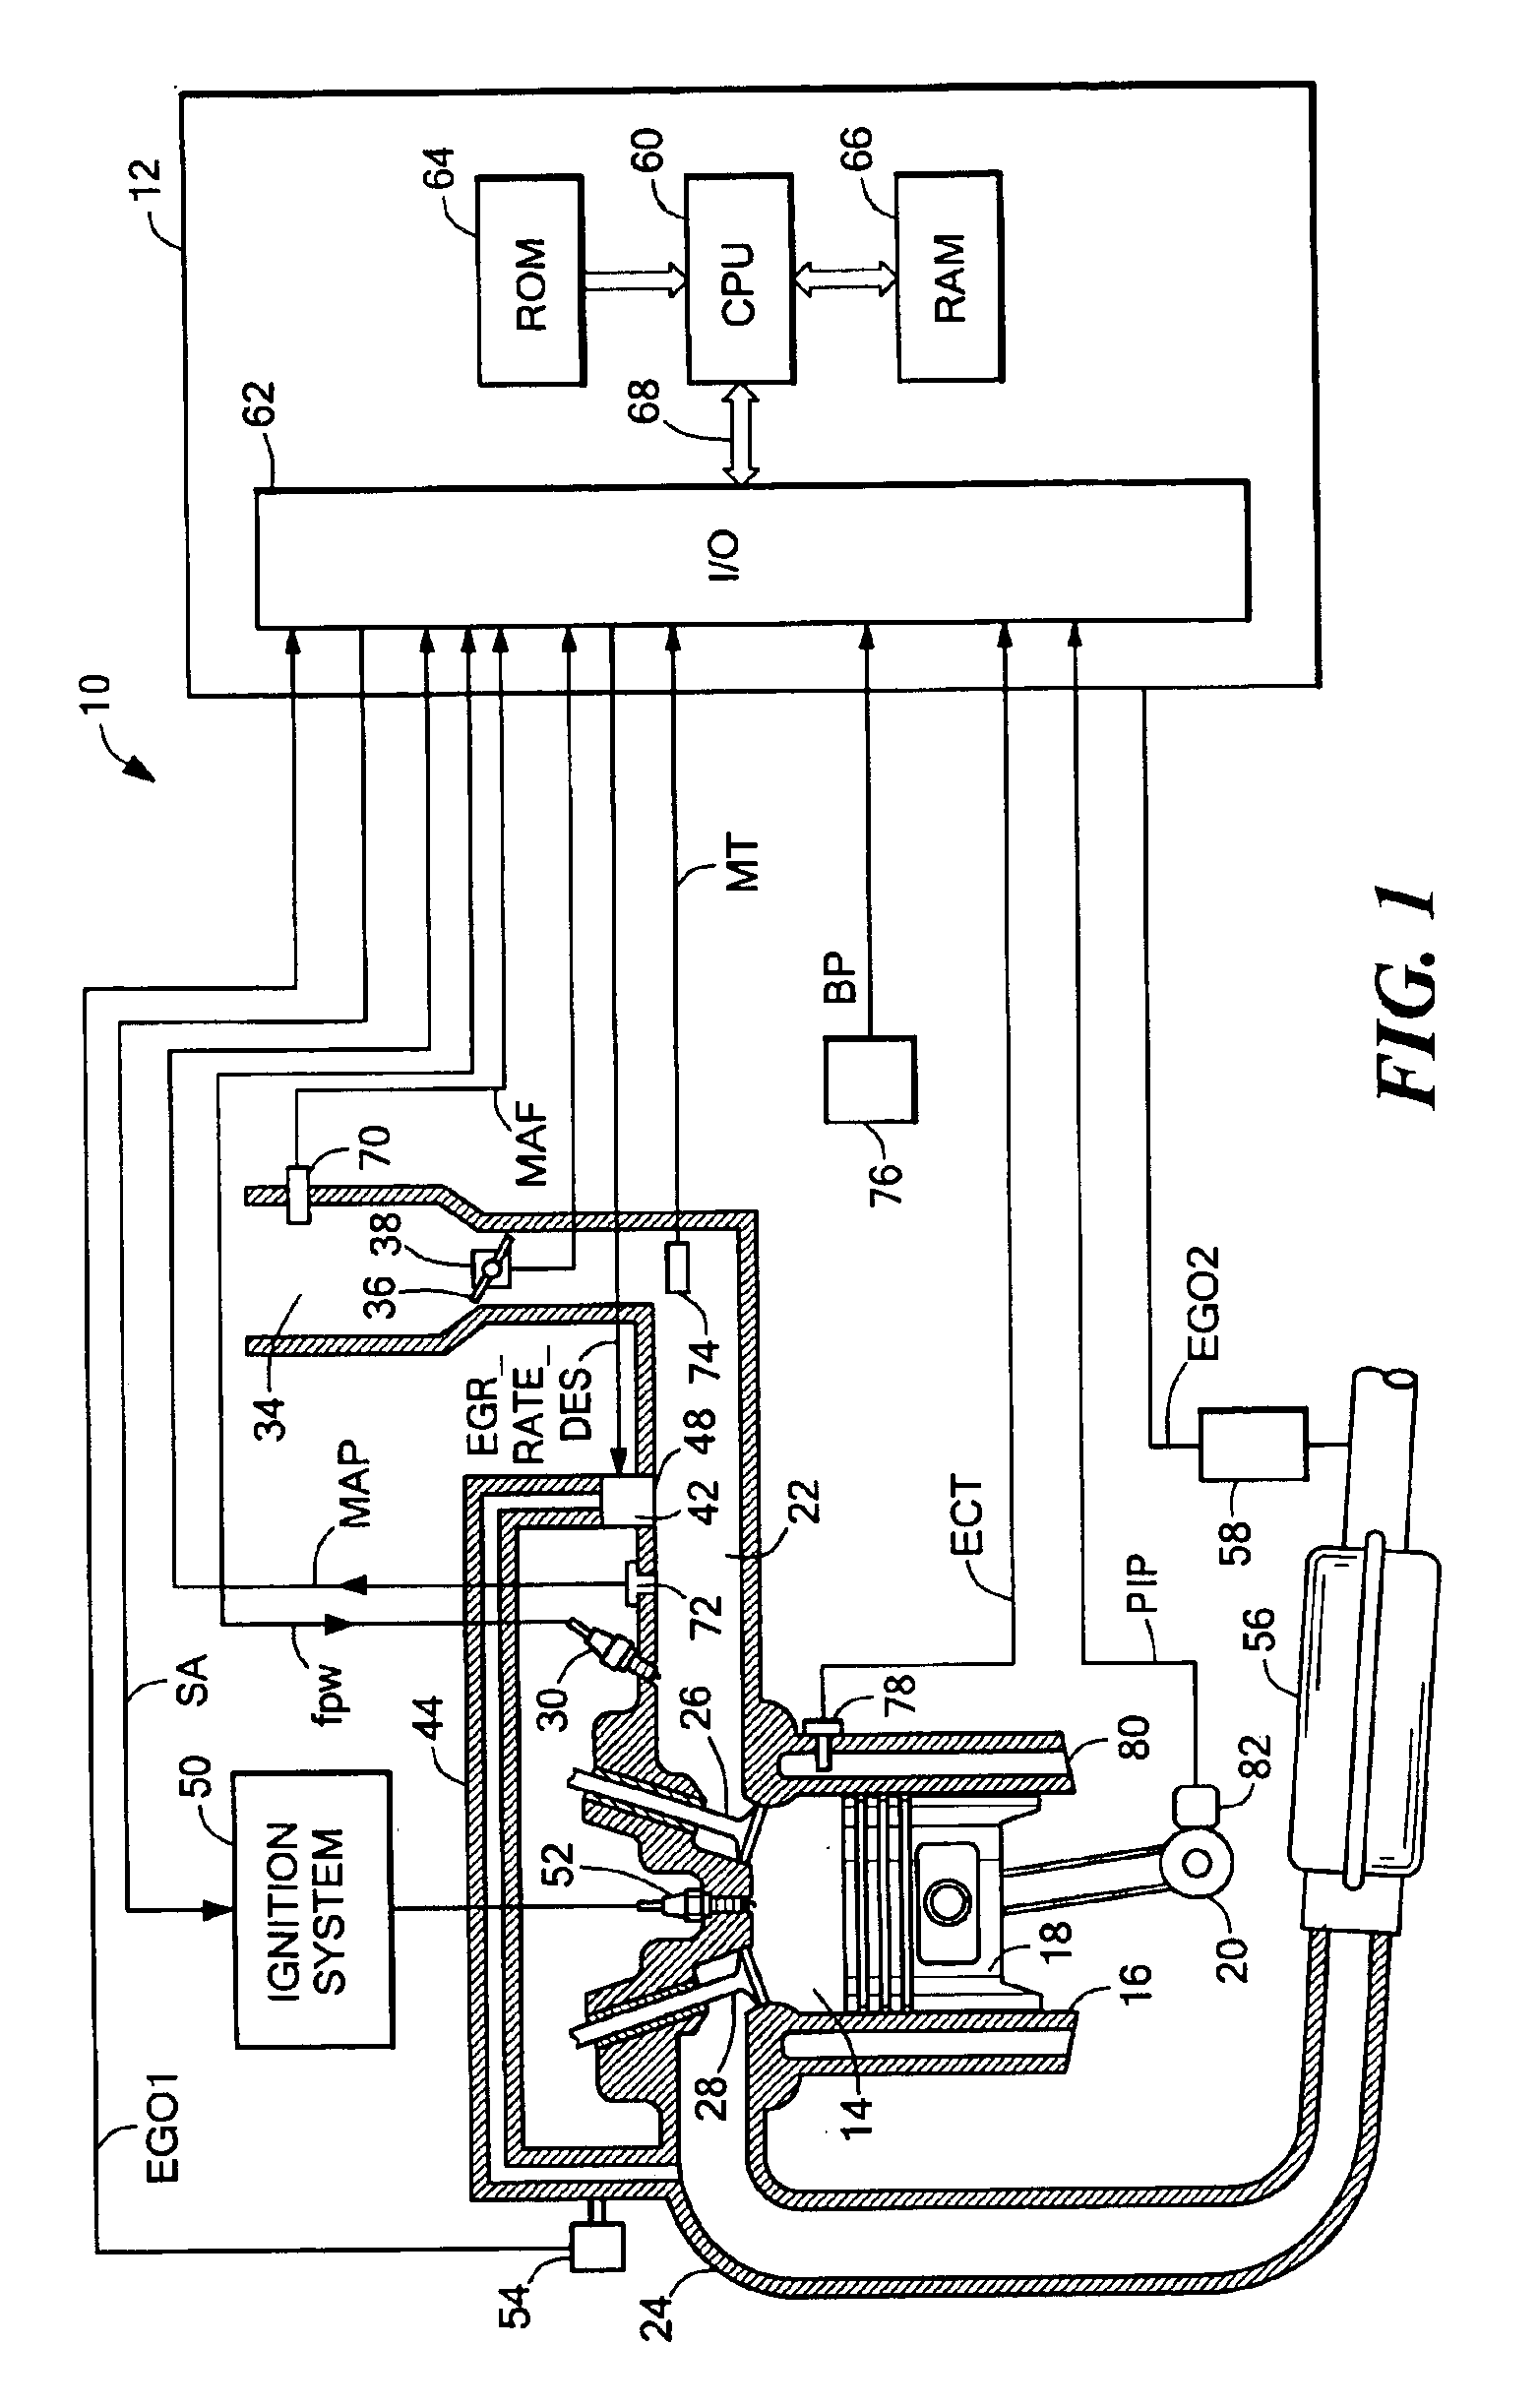 Method and system for detecting degradation of EGR flow delivery